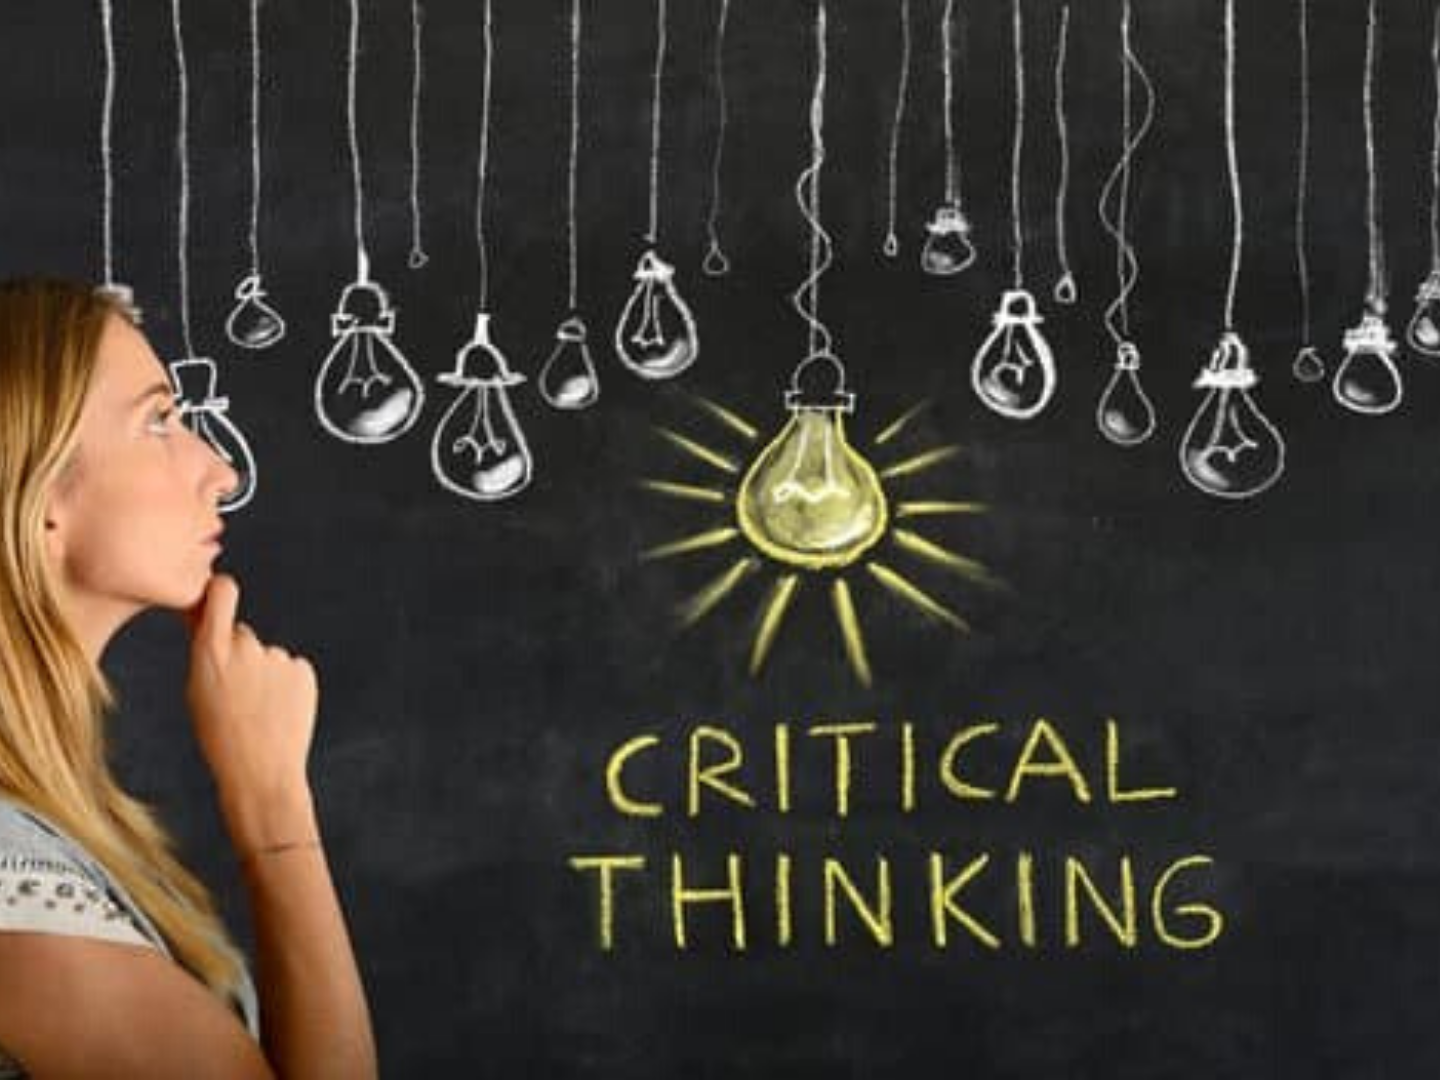 critical thinking skills think creatively and solve problems decisively